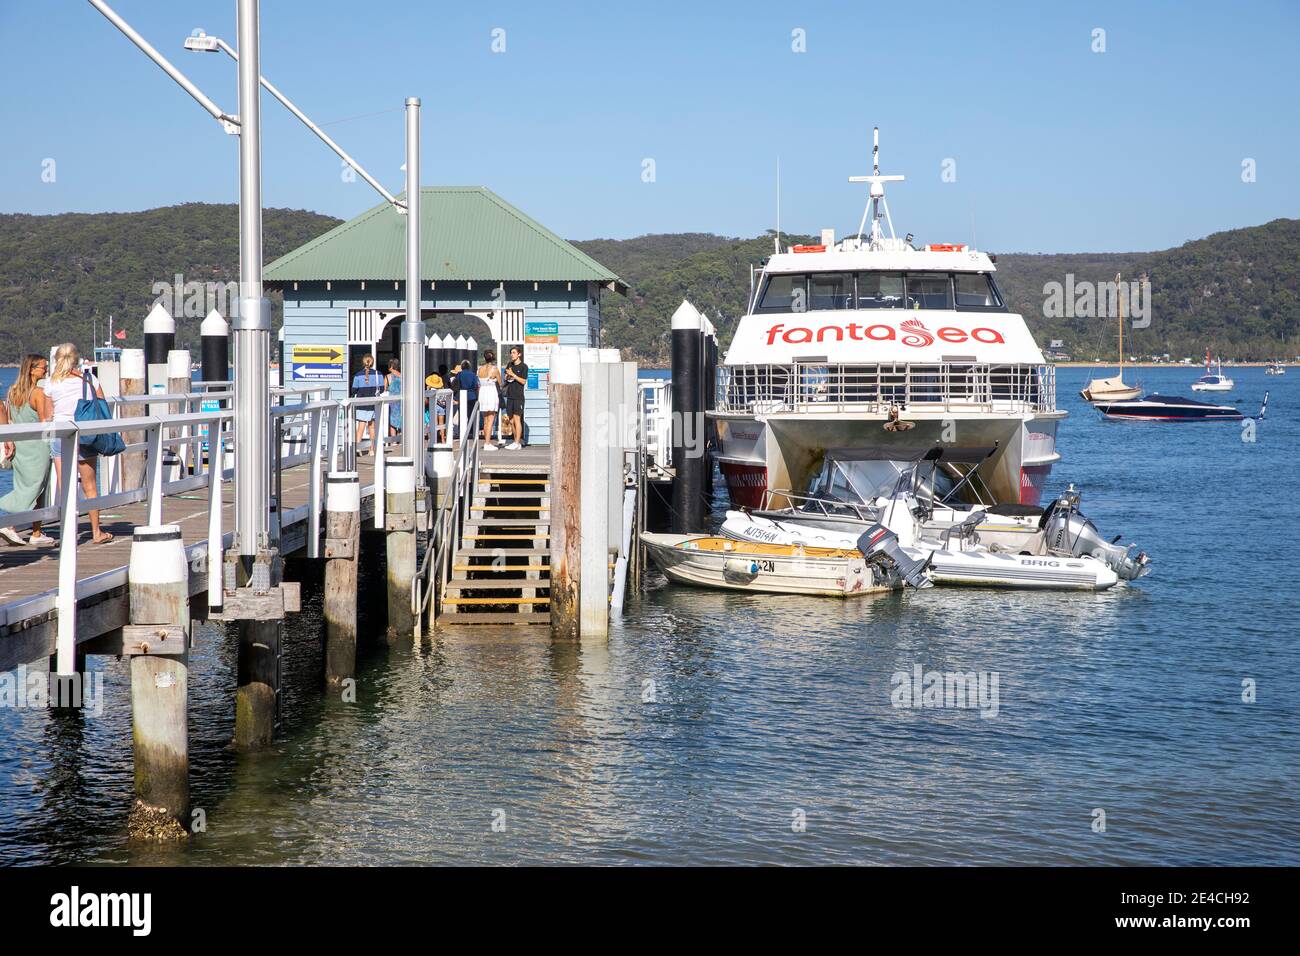 Palm beach ferry wharf on Pittwater Sydney northern beaches area, ferries transport passengers to Sydney and the central coast,Sydney,Australia Stock Photo